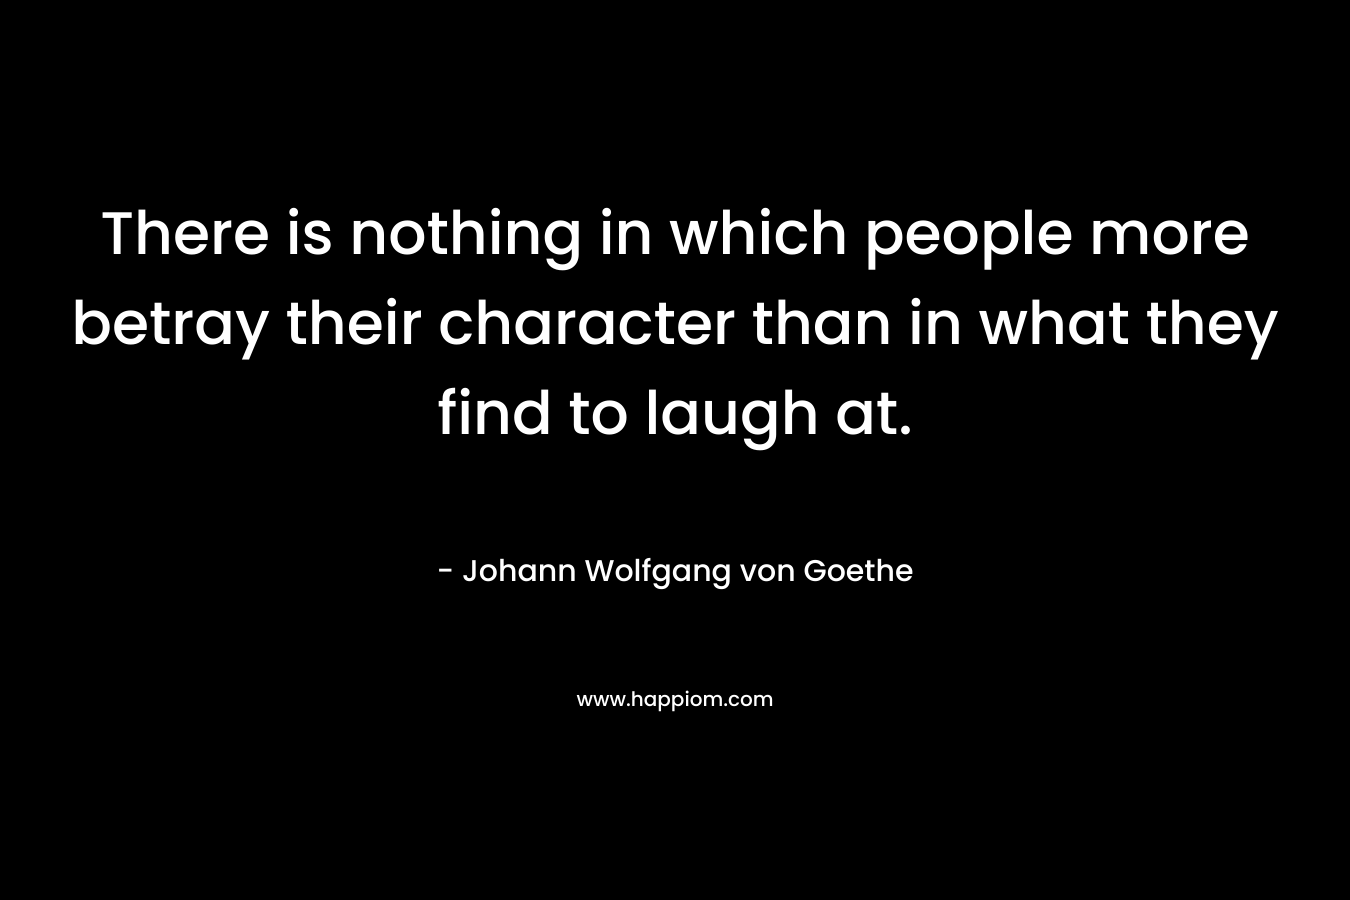 There is nothing in which people more betray their character than in what they find to laugh at. – Johann Wolfgang von Goethe